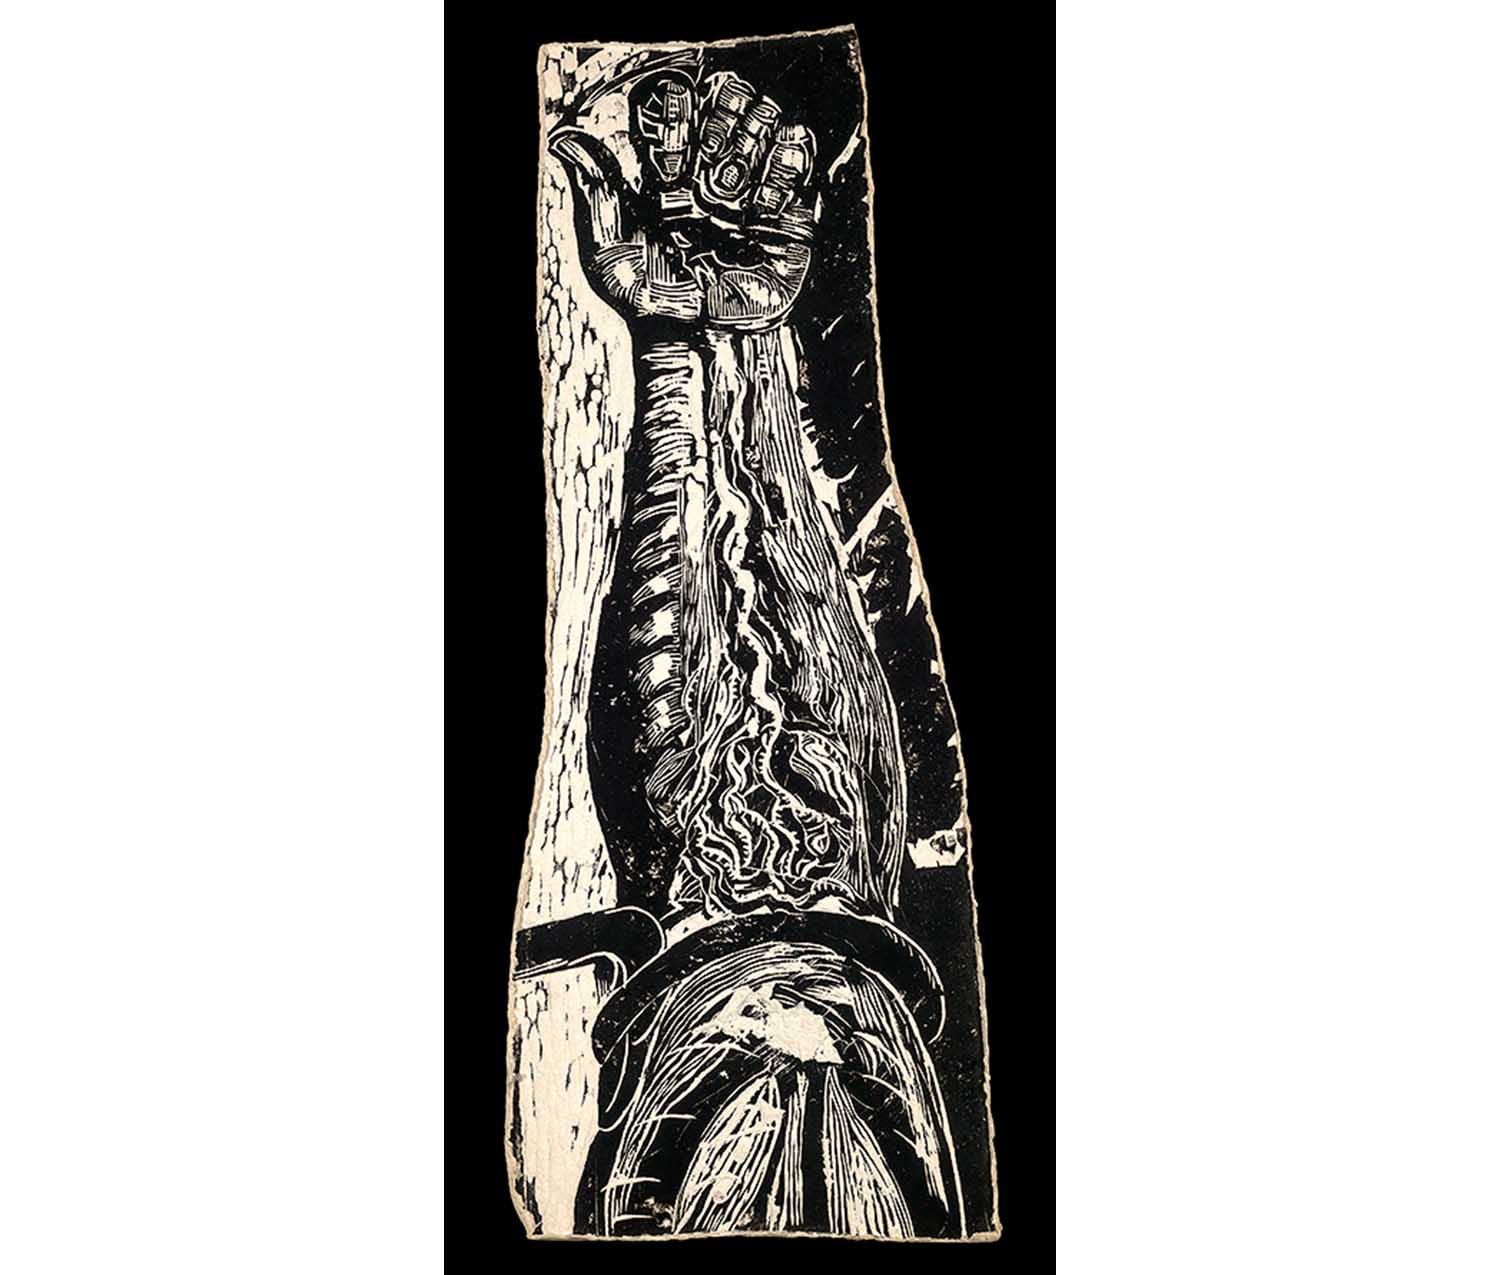 long vertical muscular arm showing interior veins and arteries